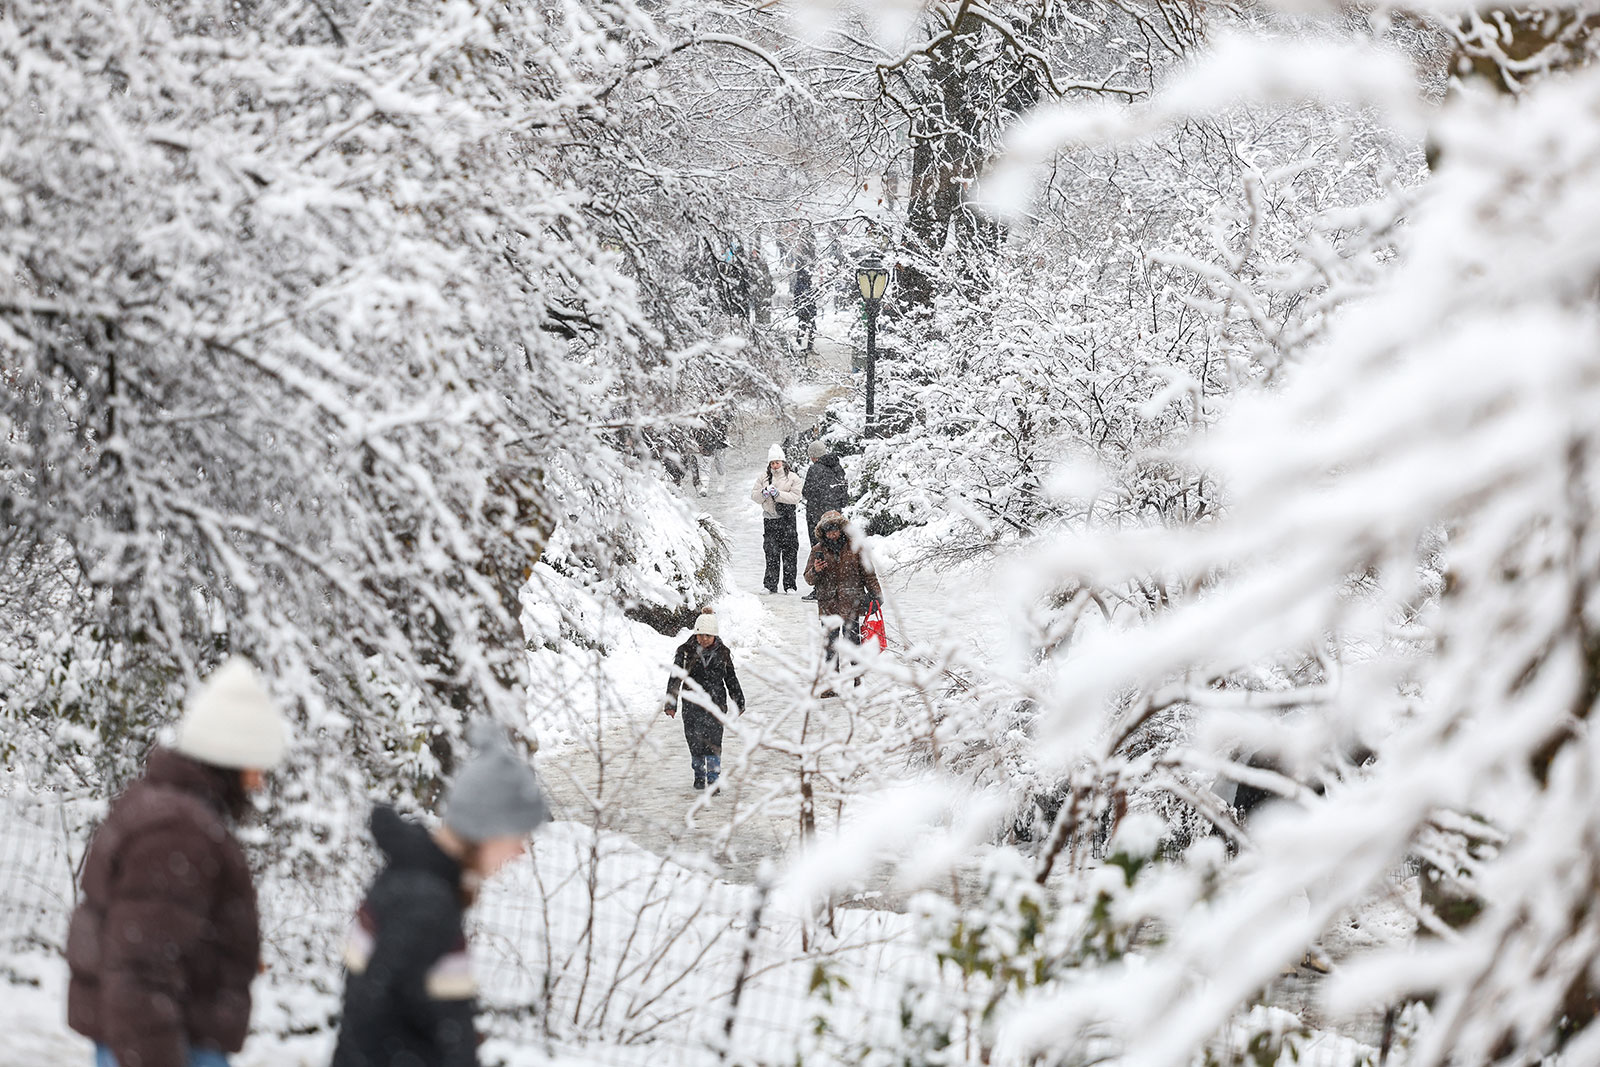 People walk through the falling snow in Central Park on Tuesday in New York.